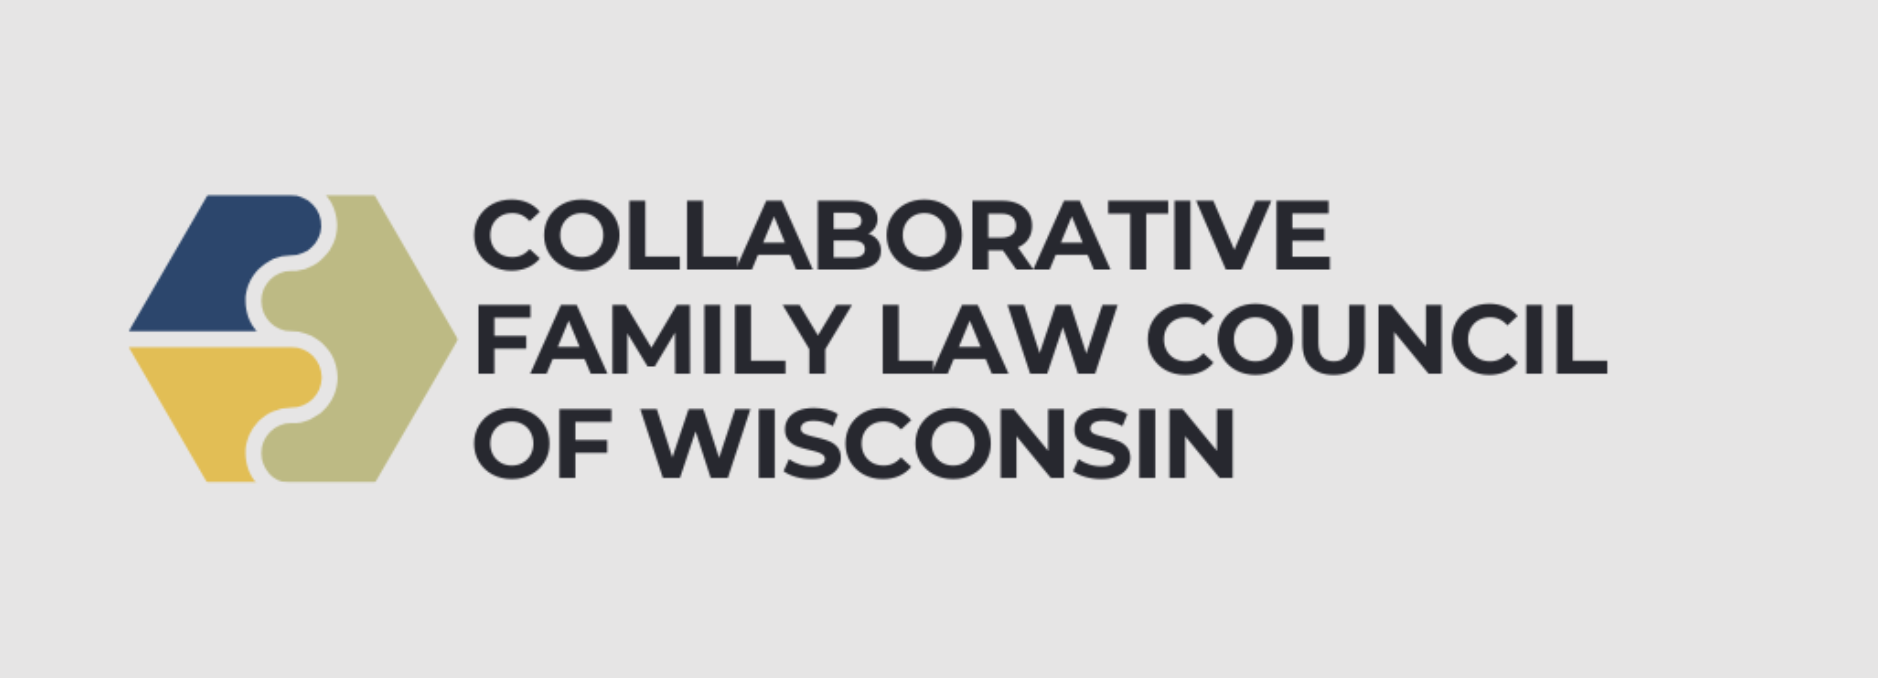 Collaborative Family Law Council of Wisconsin 